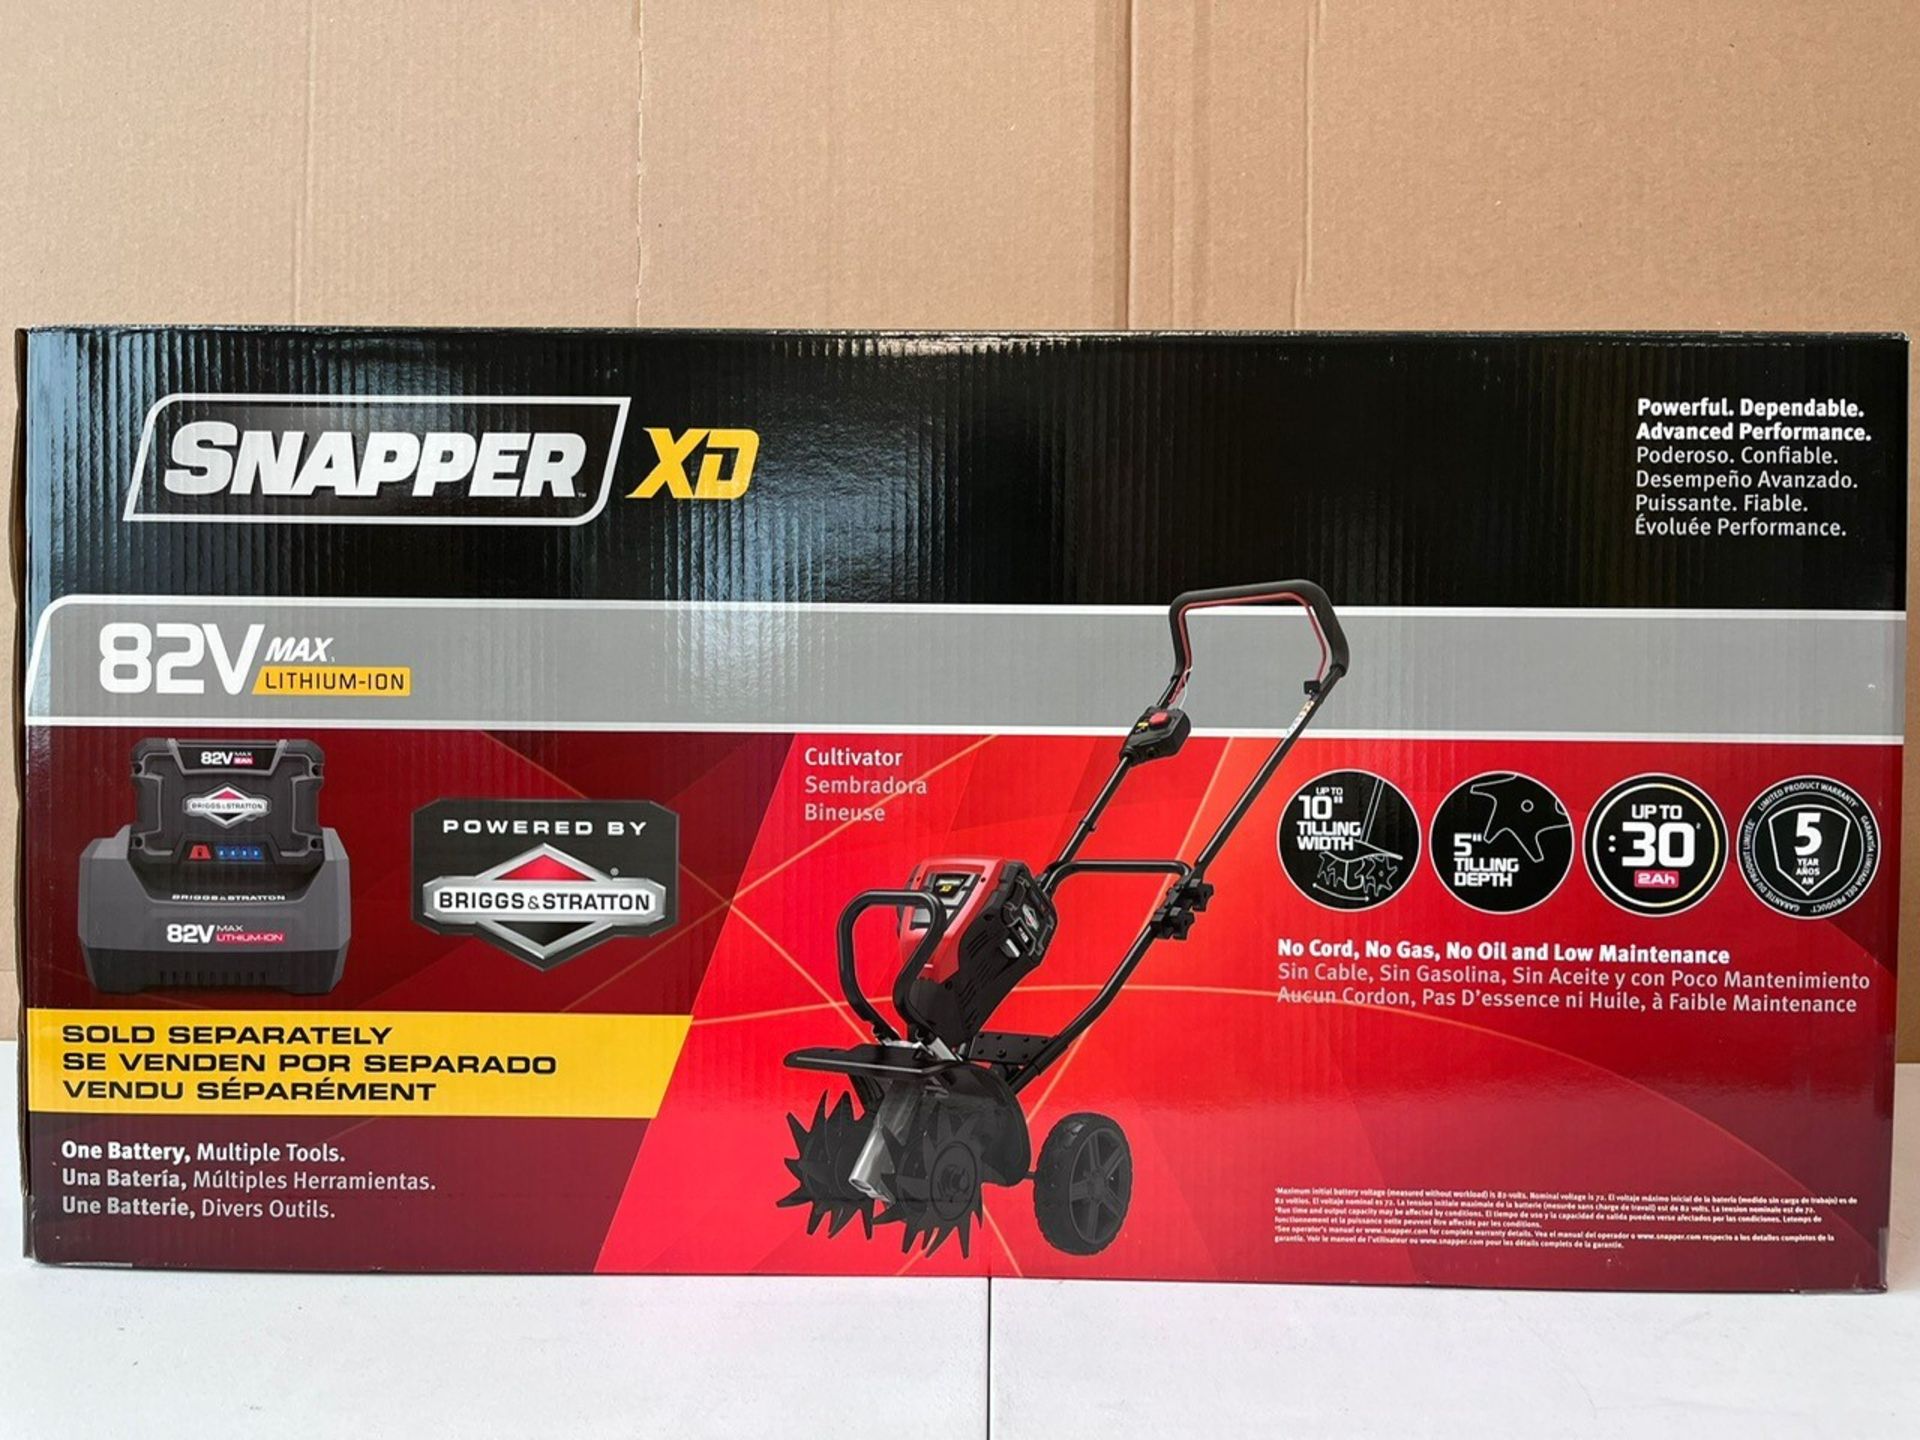 Snapper - Xd 82V Cultivator - Battery Not Included